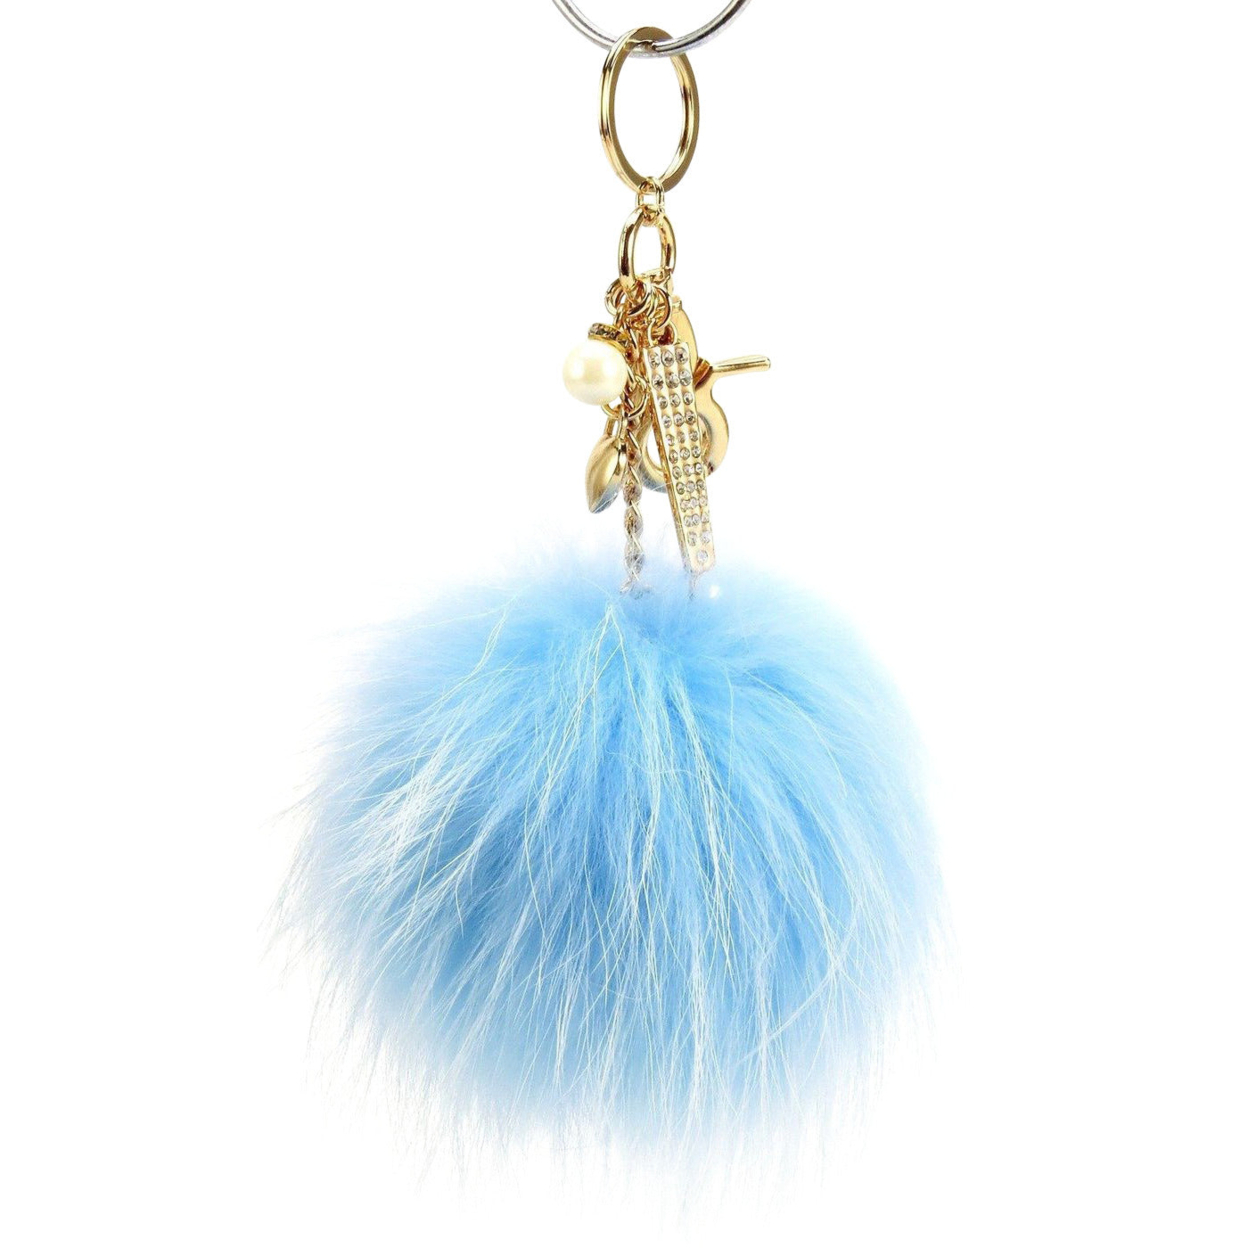 Real Fur Puff Ball Pom-Pom 6 Accessory Dangle Purse Charm - Light Blue With Gold Hardware